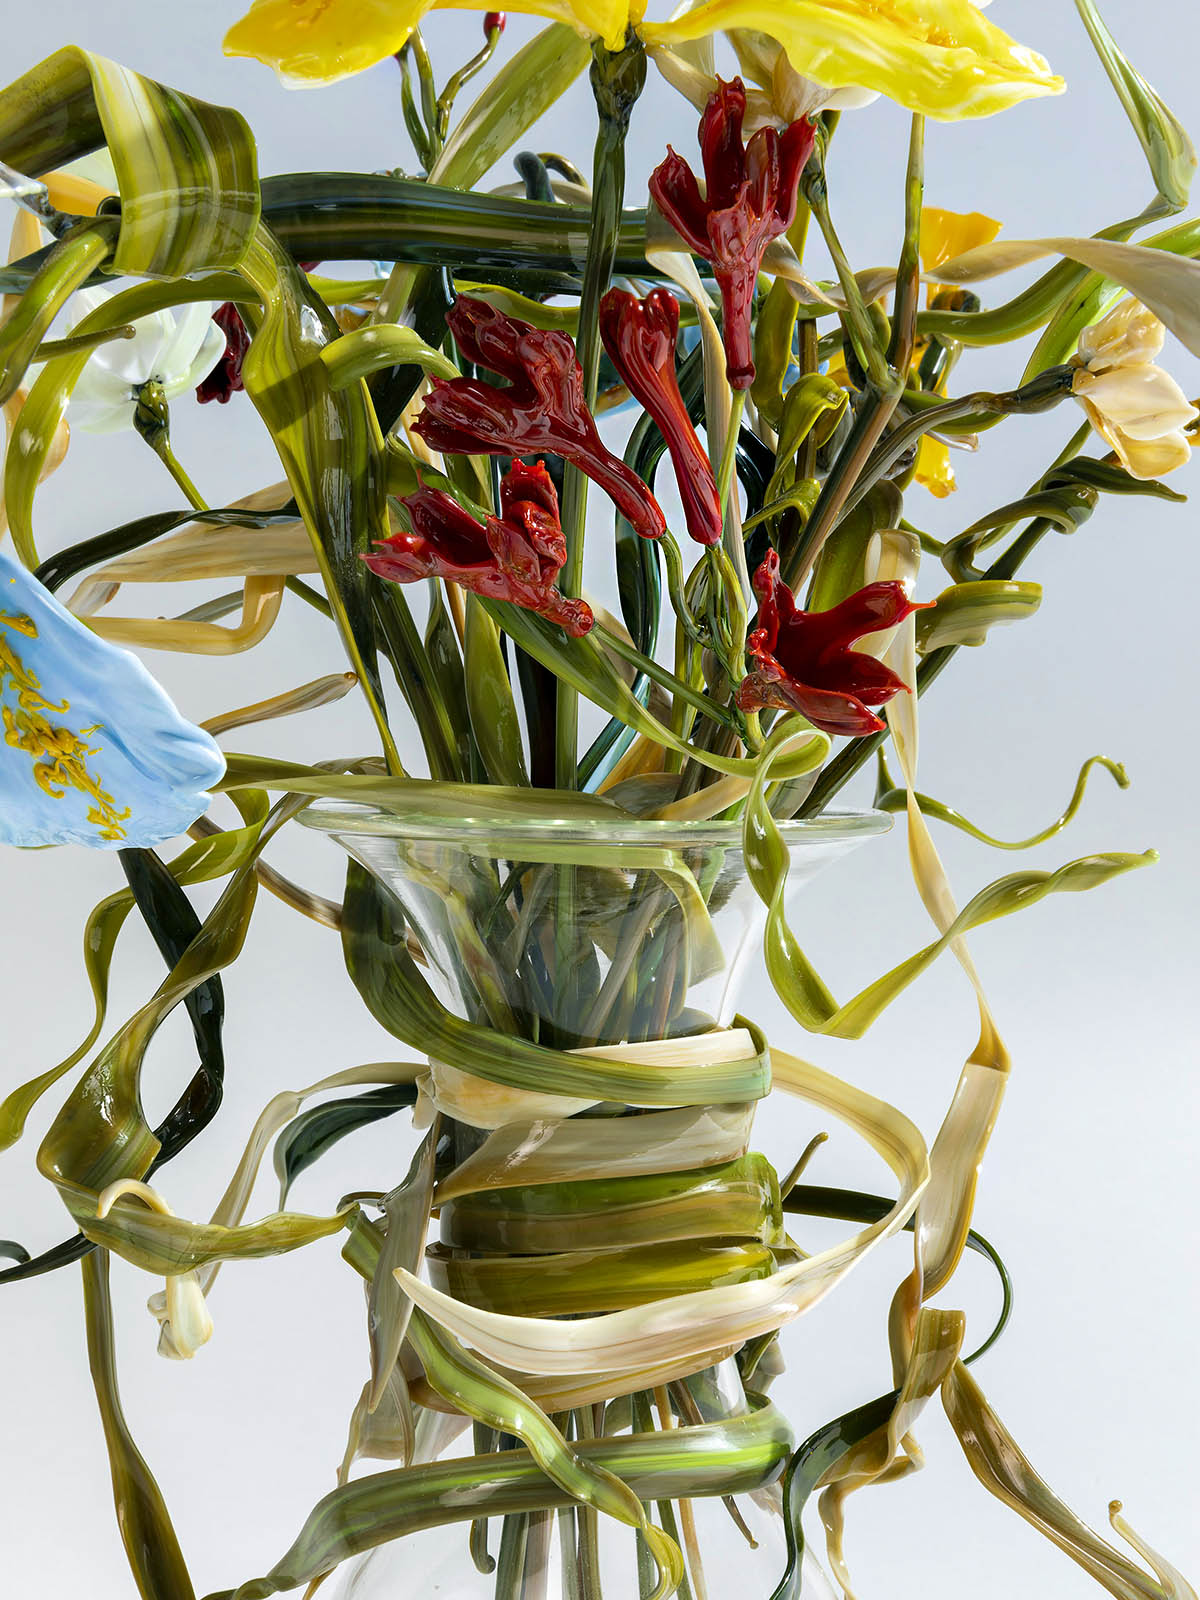 Wilting Flowers Elegantly Sculpted in Glass 01